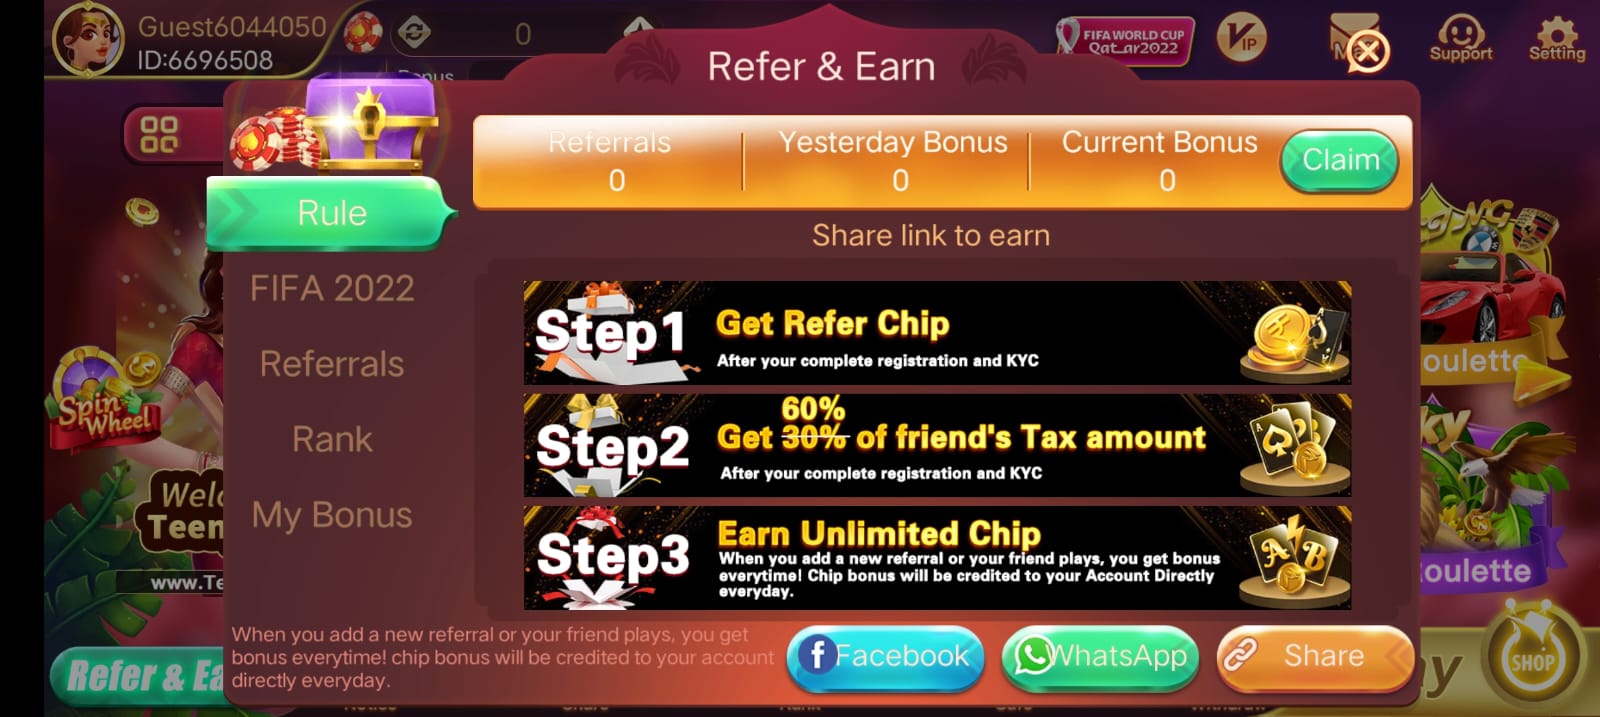 REFER AND EARN IN TEEN PATTI PRO APP